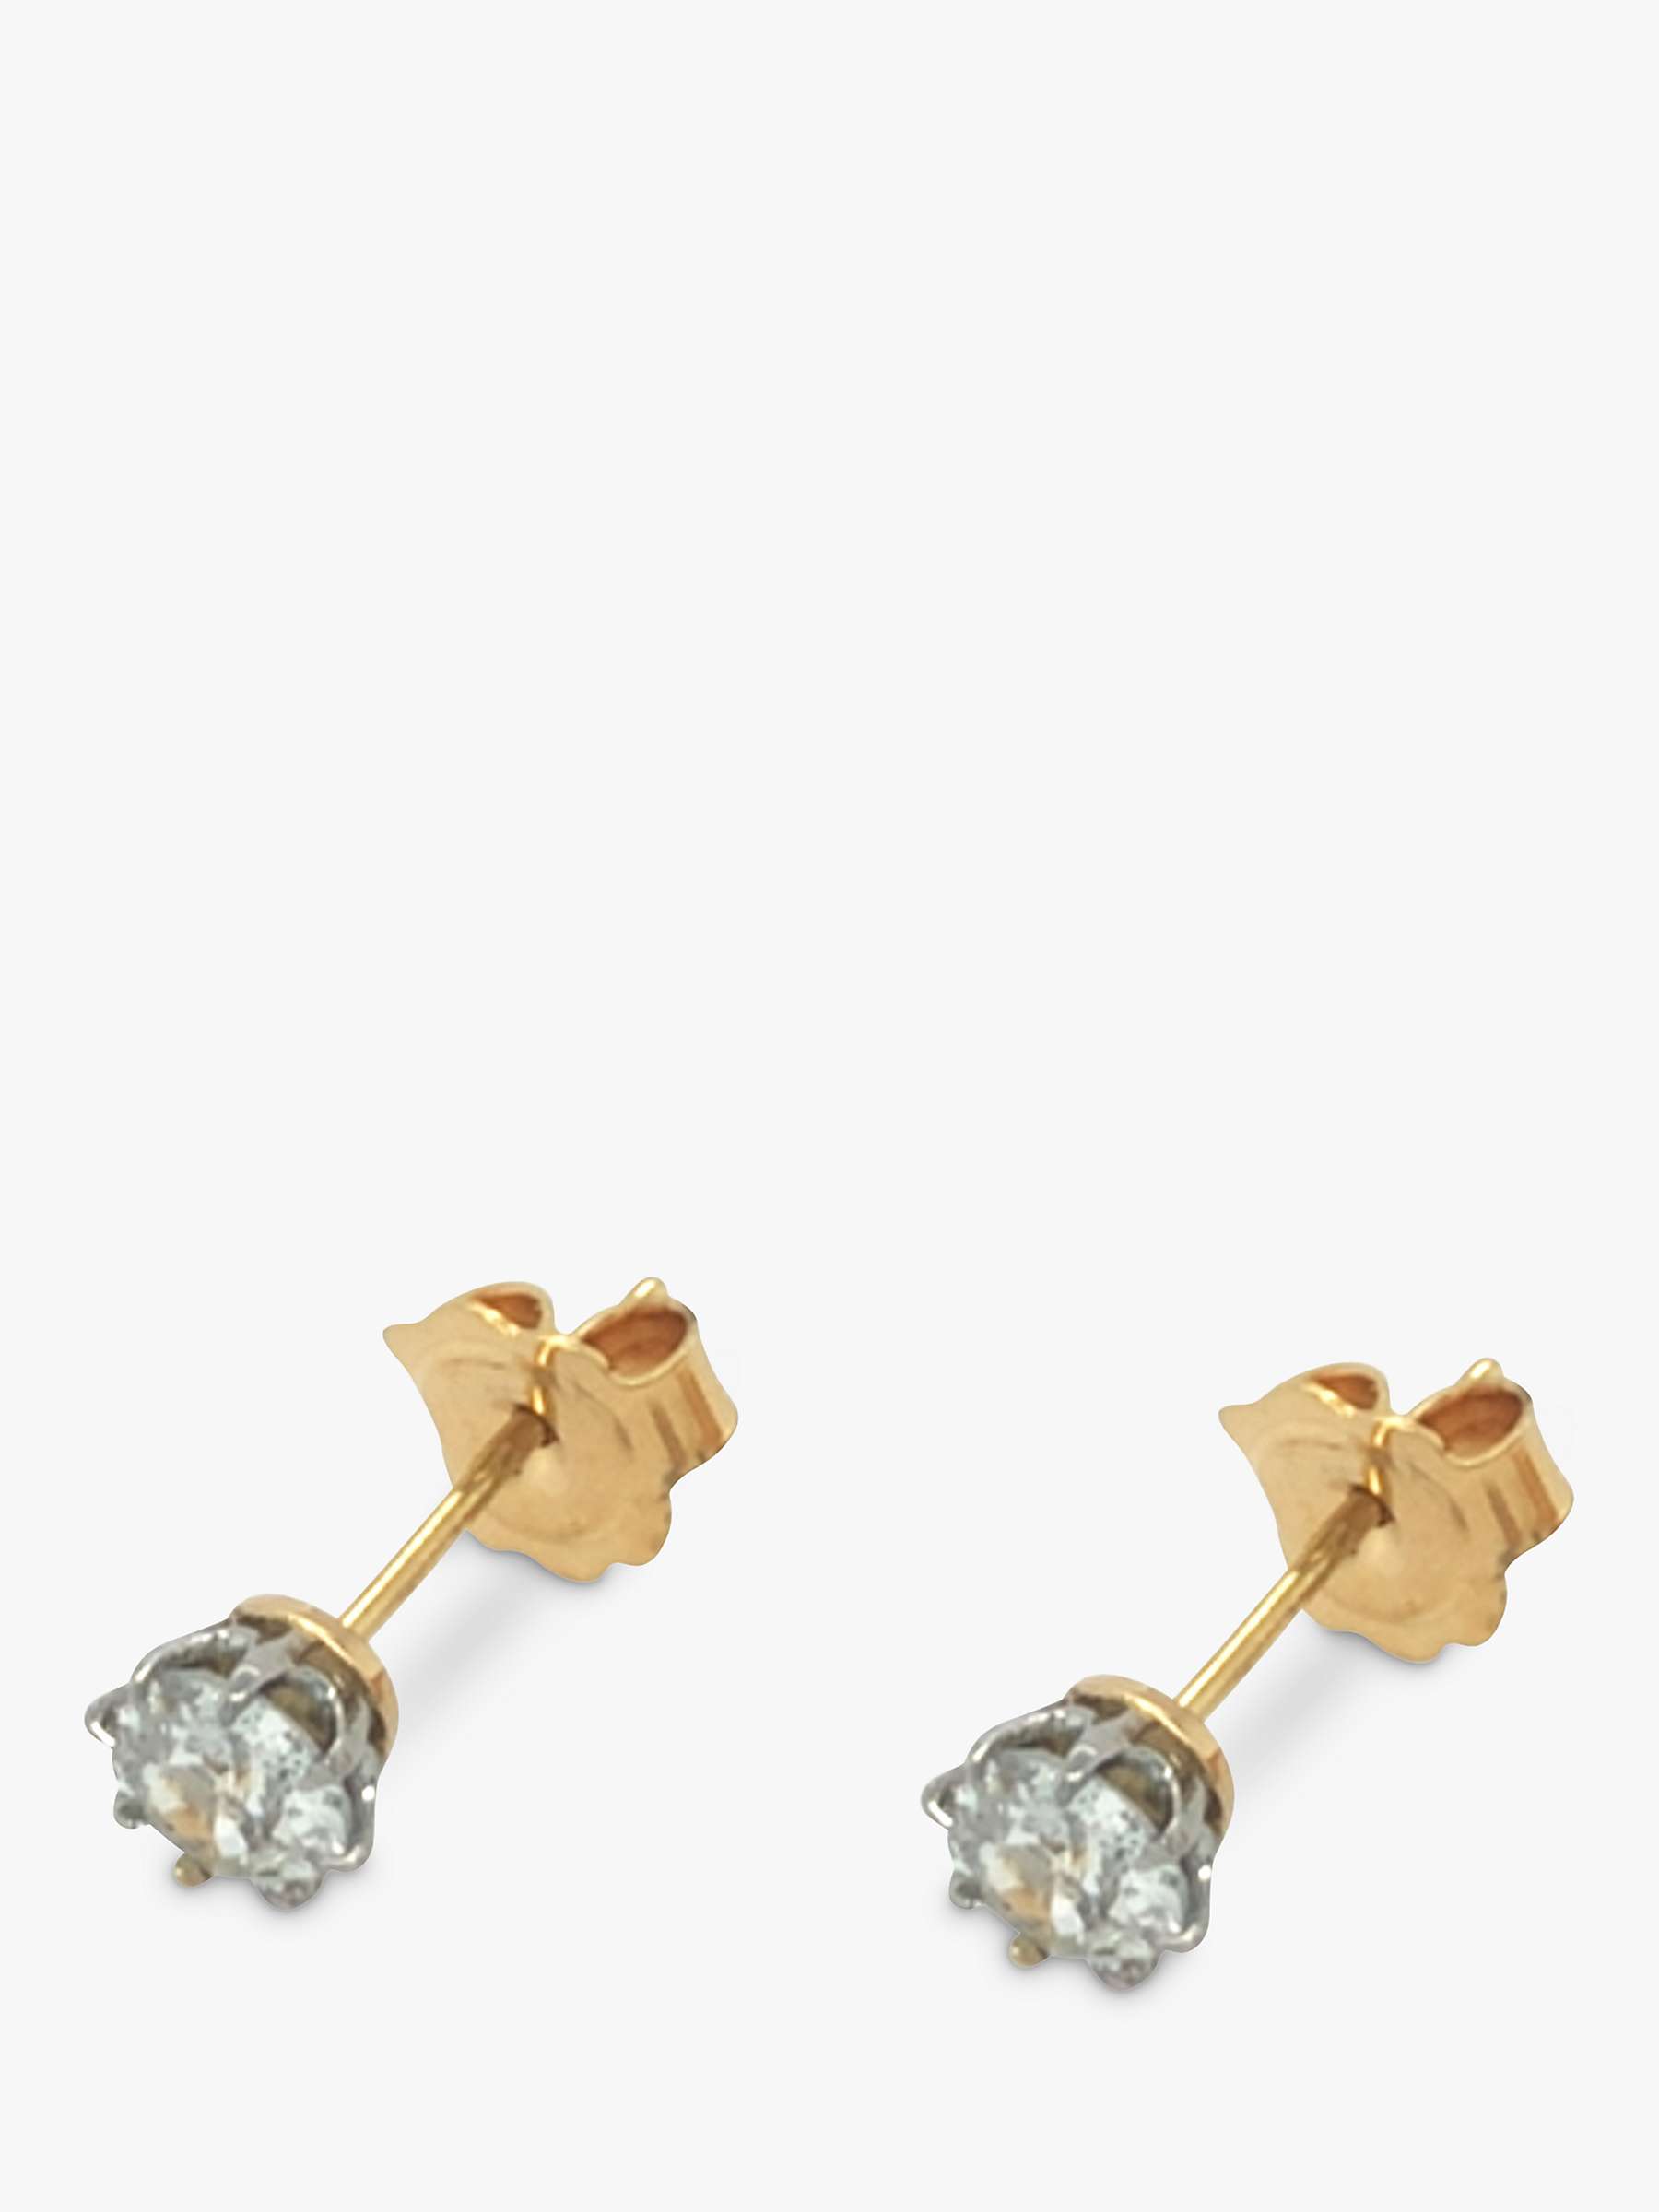 Buy Vintage Fine Jewellery Second Hand 18ct White & Yellow Gold Diamond Stud Earrings Online at johnlewis.com